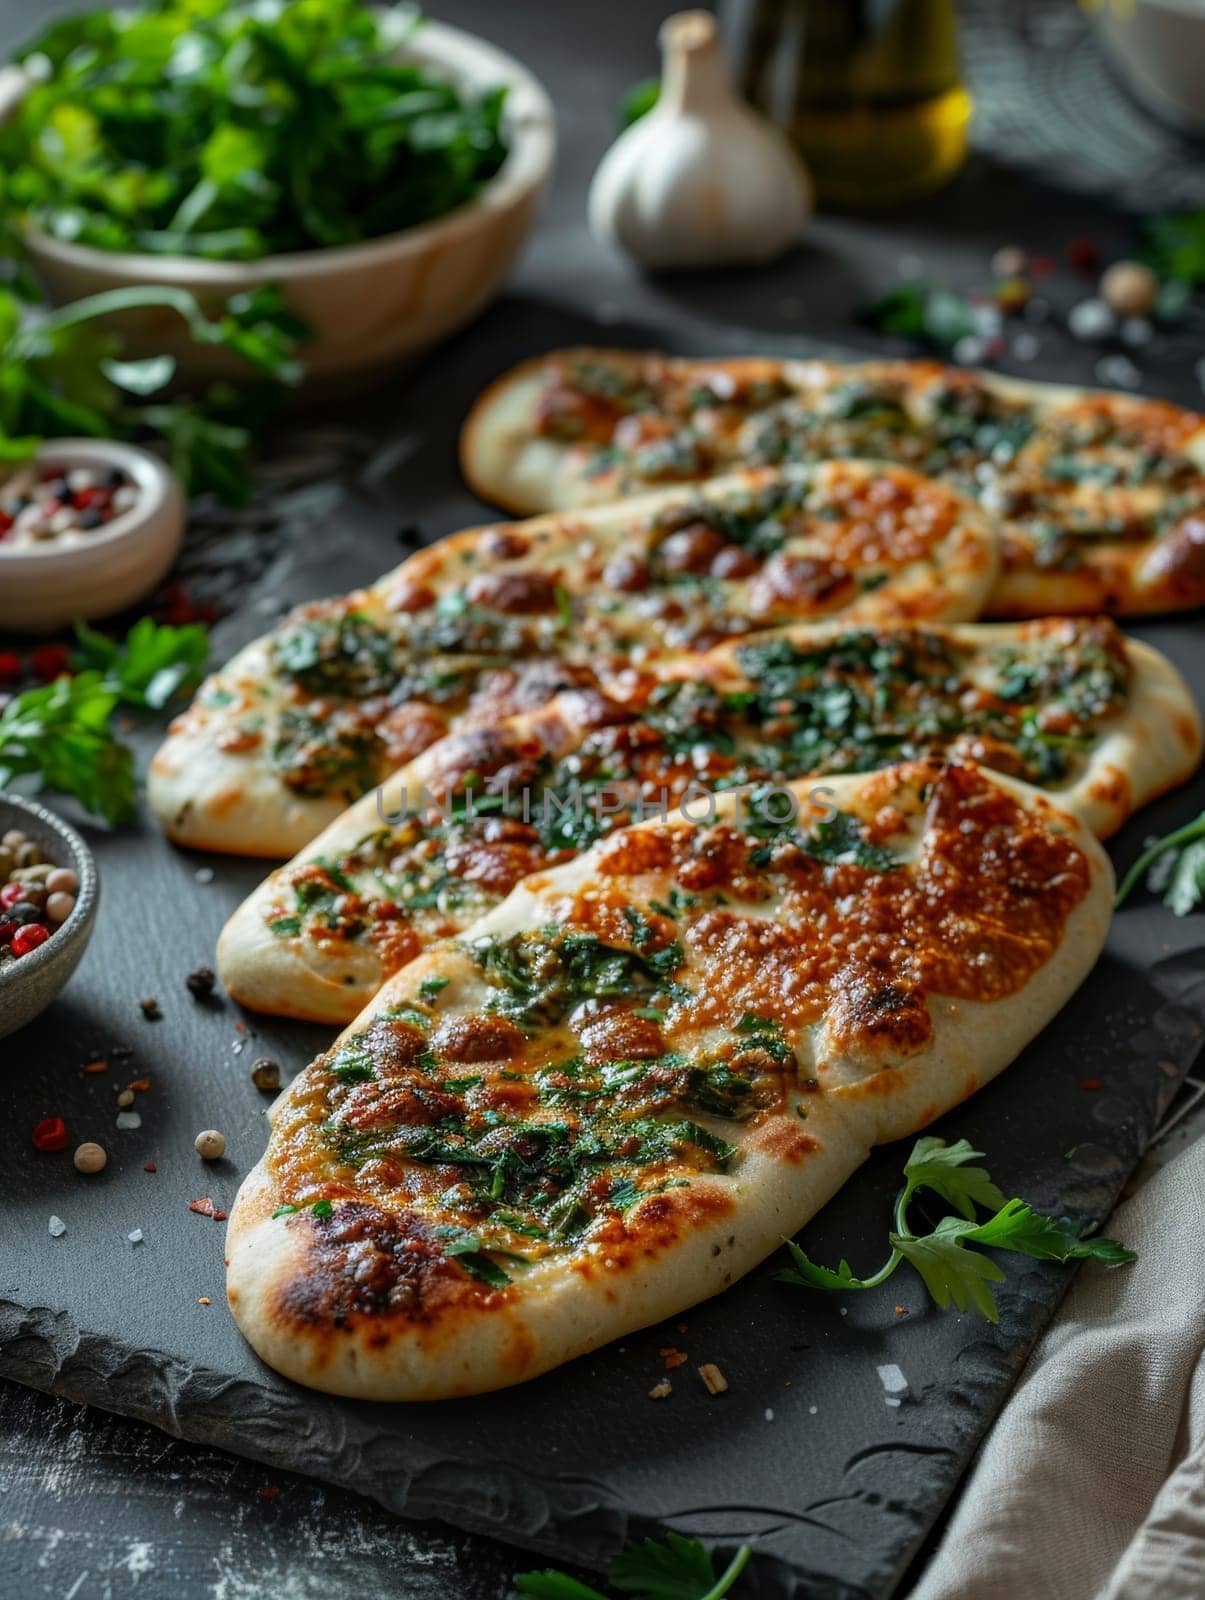 Azerbaijani qutab, stuffed flatbreads with greens or minced meat, served on a slate serving board. A traditional dish from Azerbaijan, delicious and flavorful